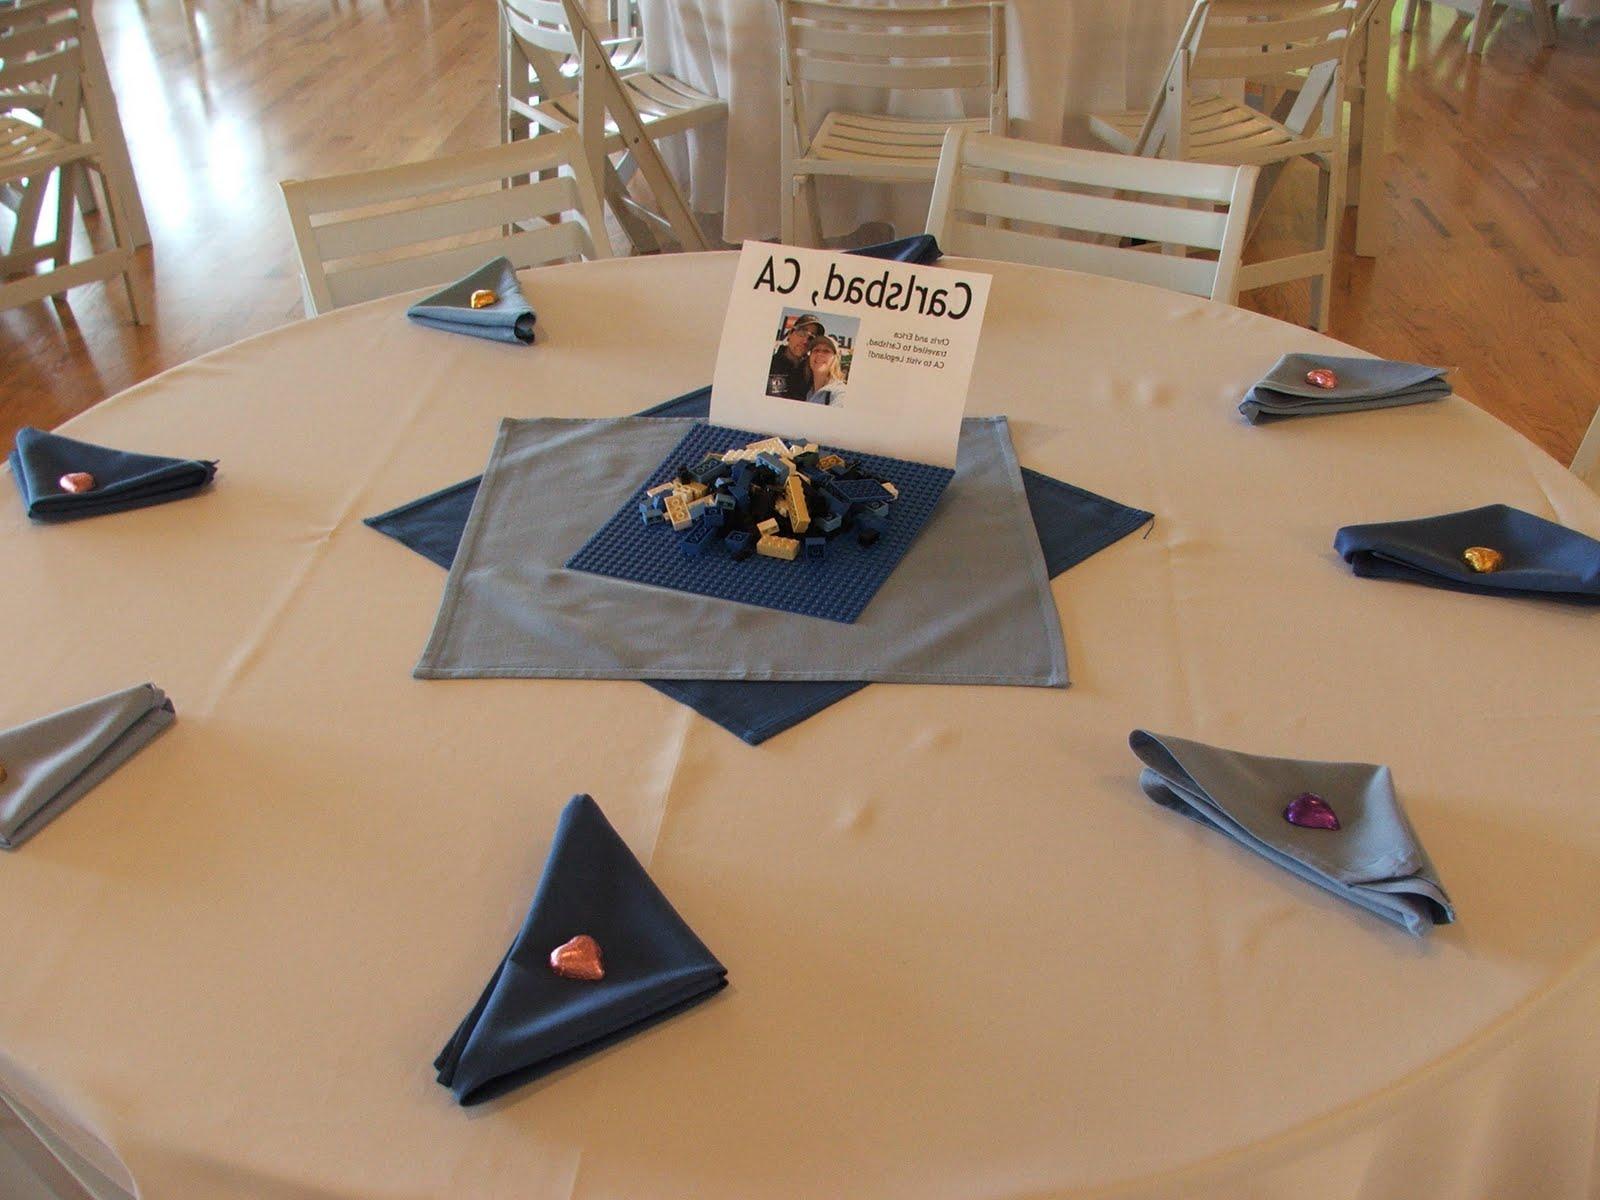 and centerpieces that were